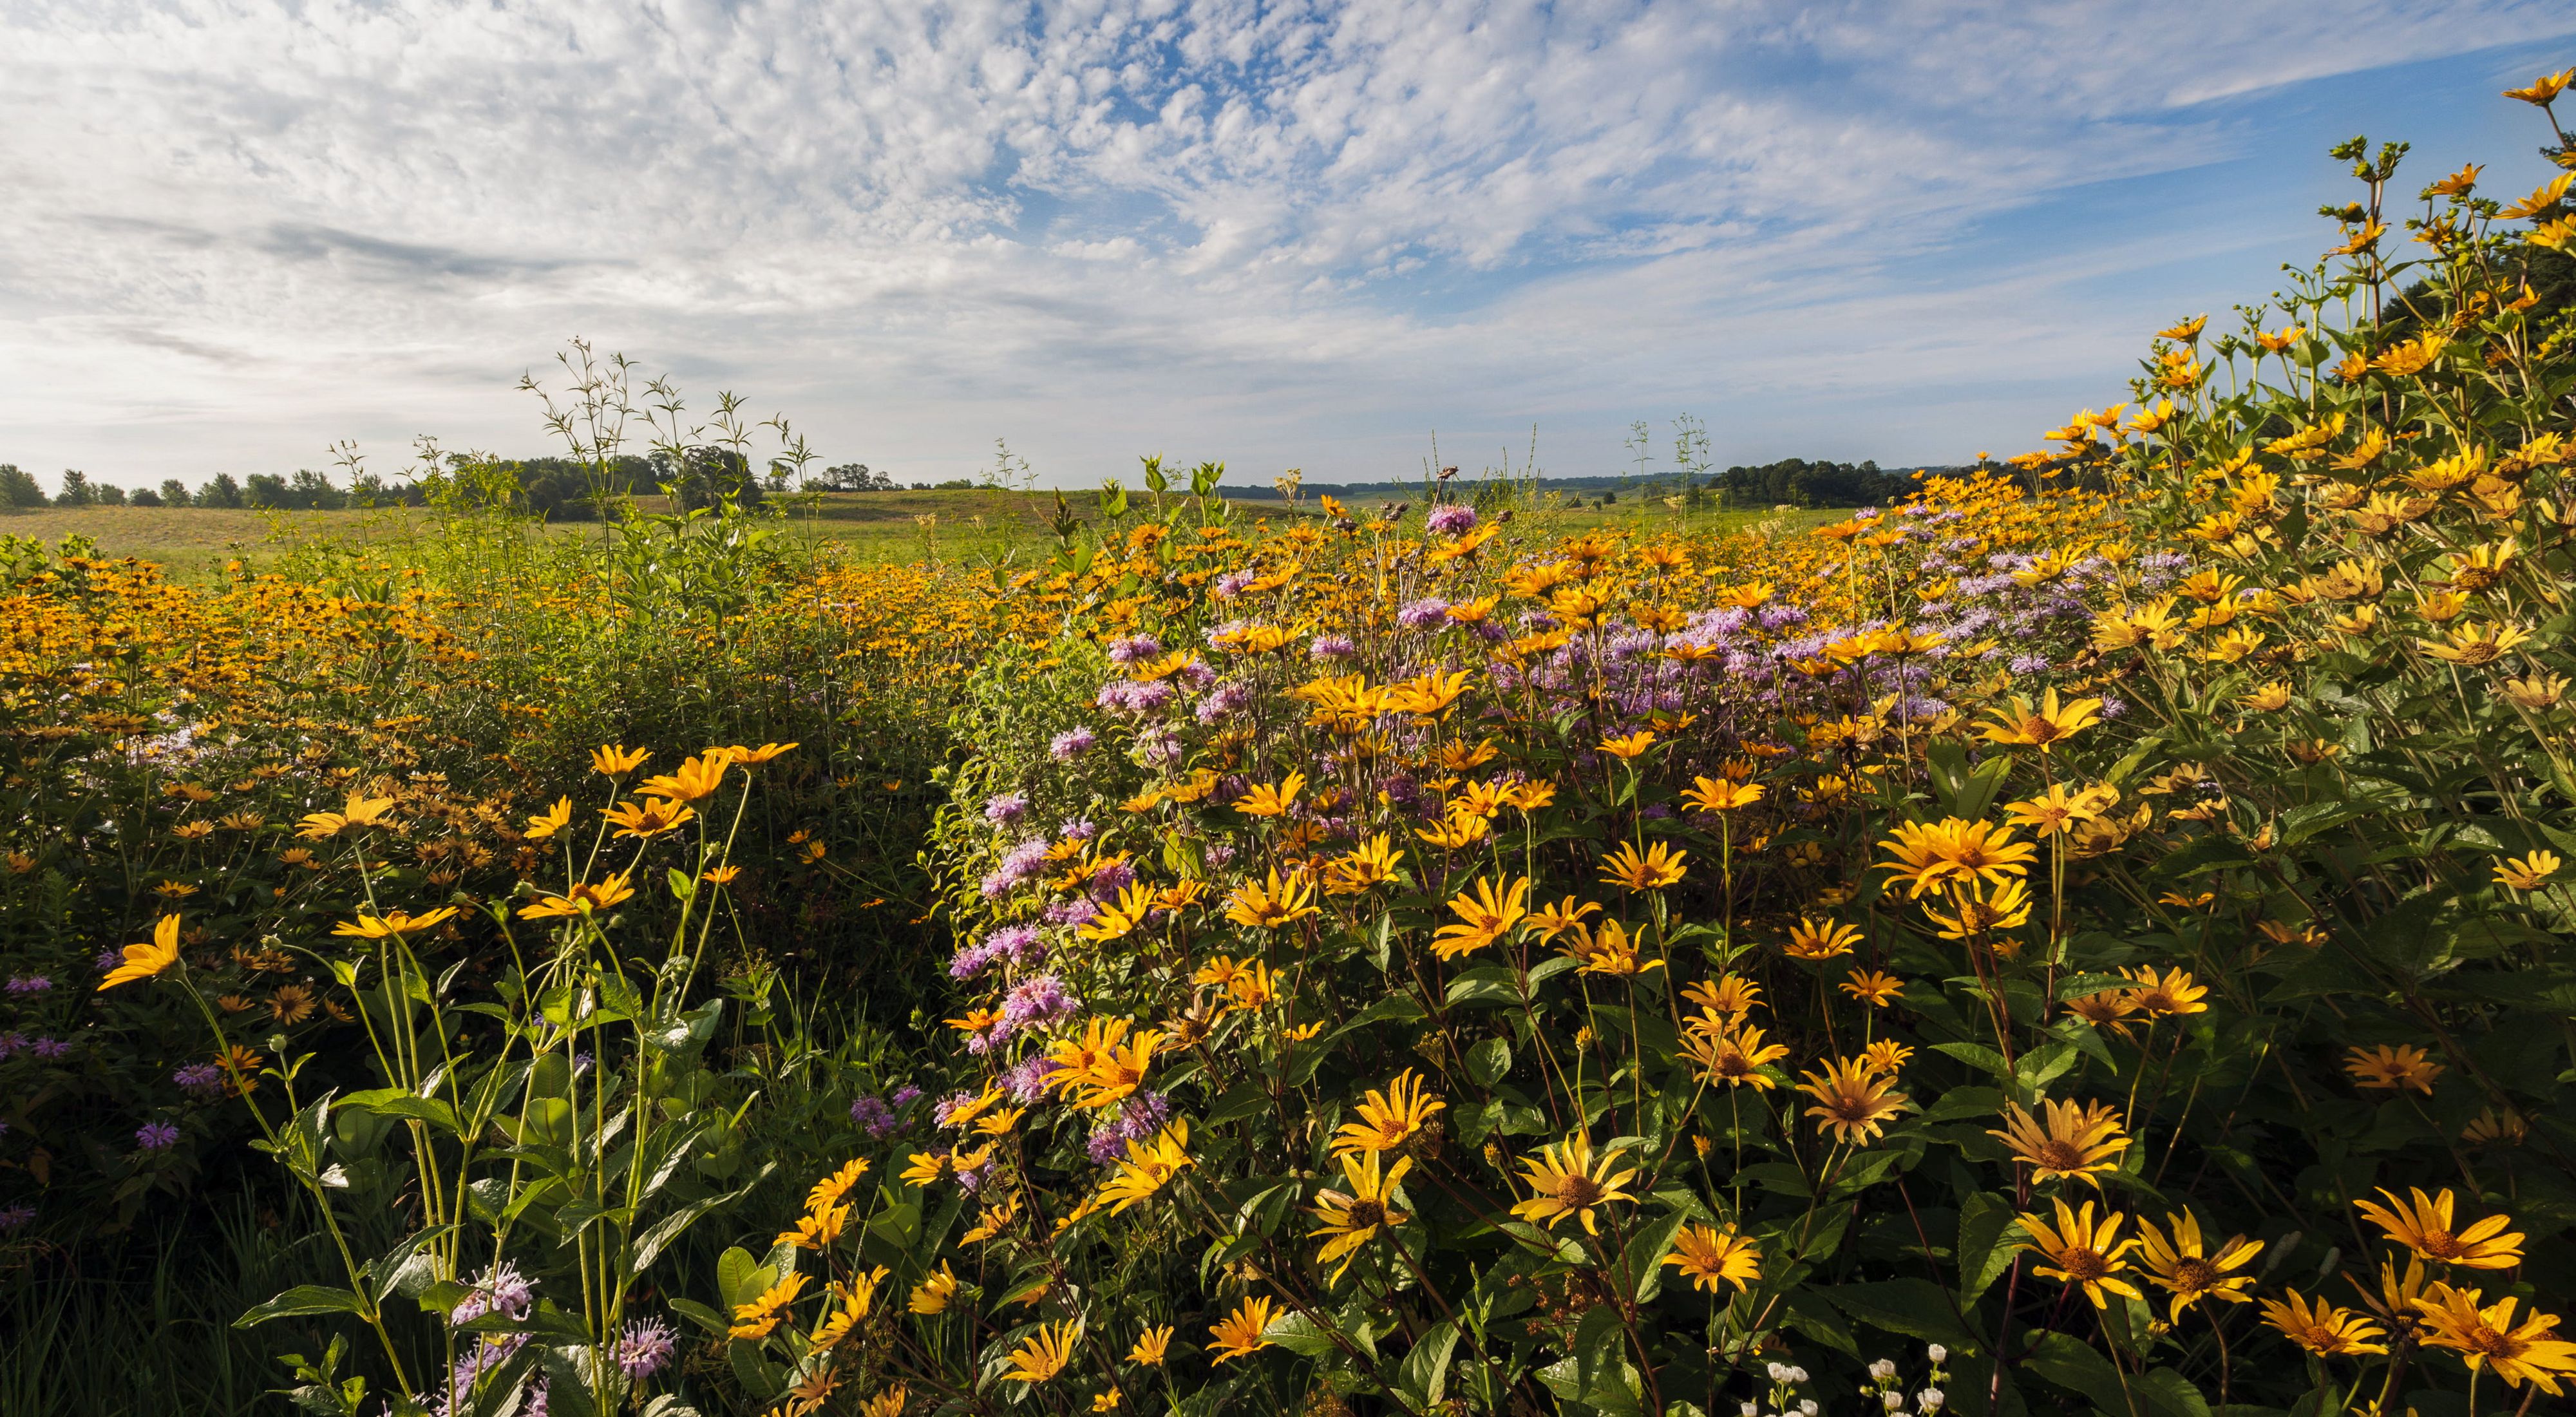 A large swath of yellow and purple wildflowers in the foreground along the edge of a wide grassy field at Nachusa Grasslands.